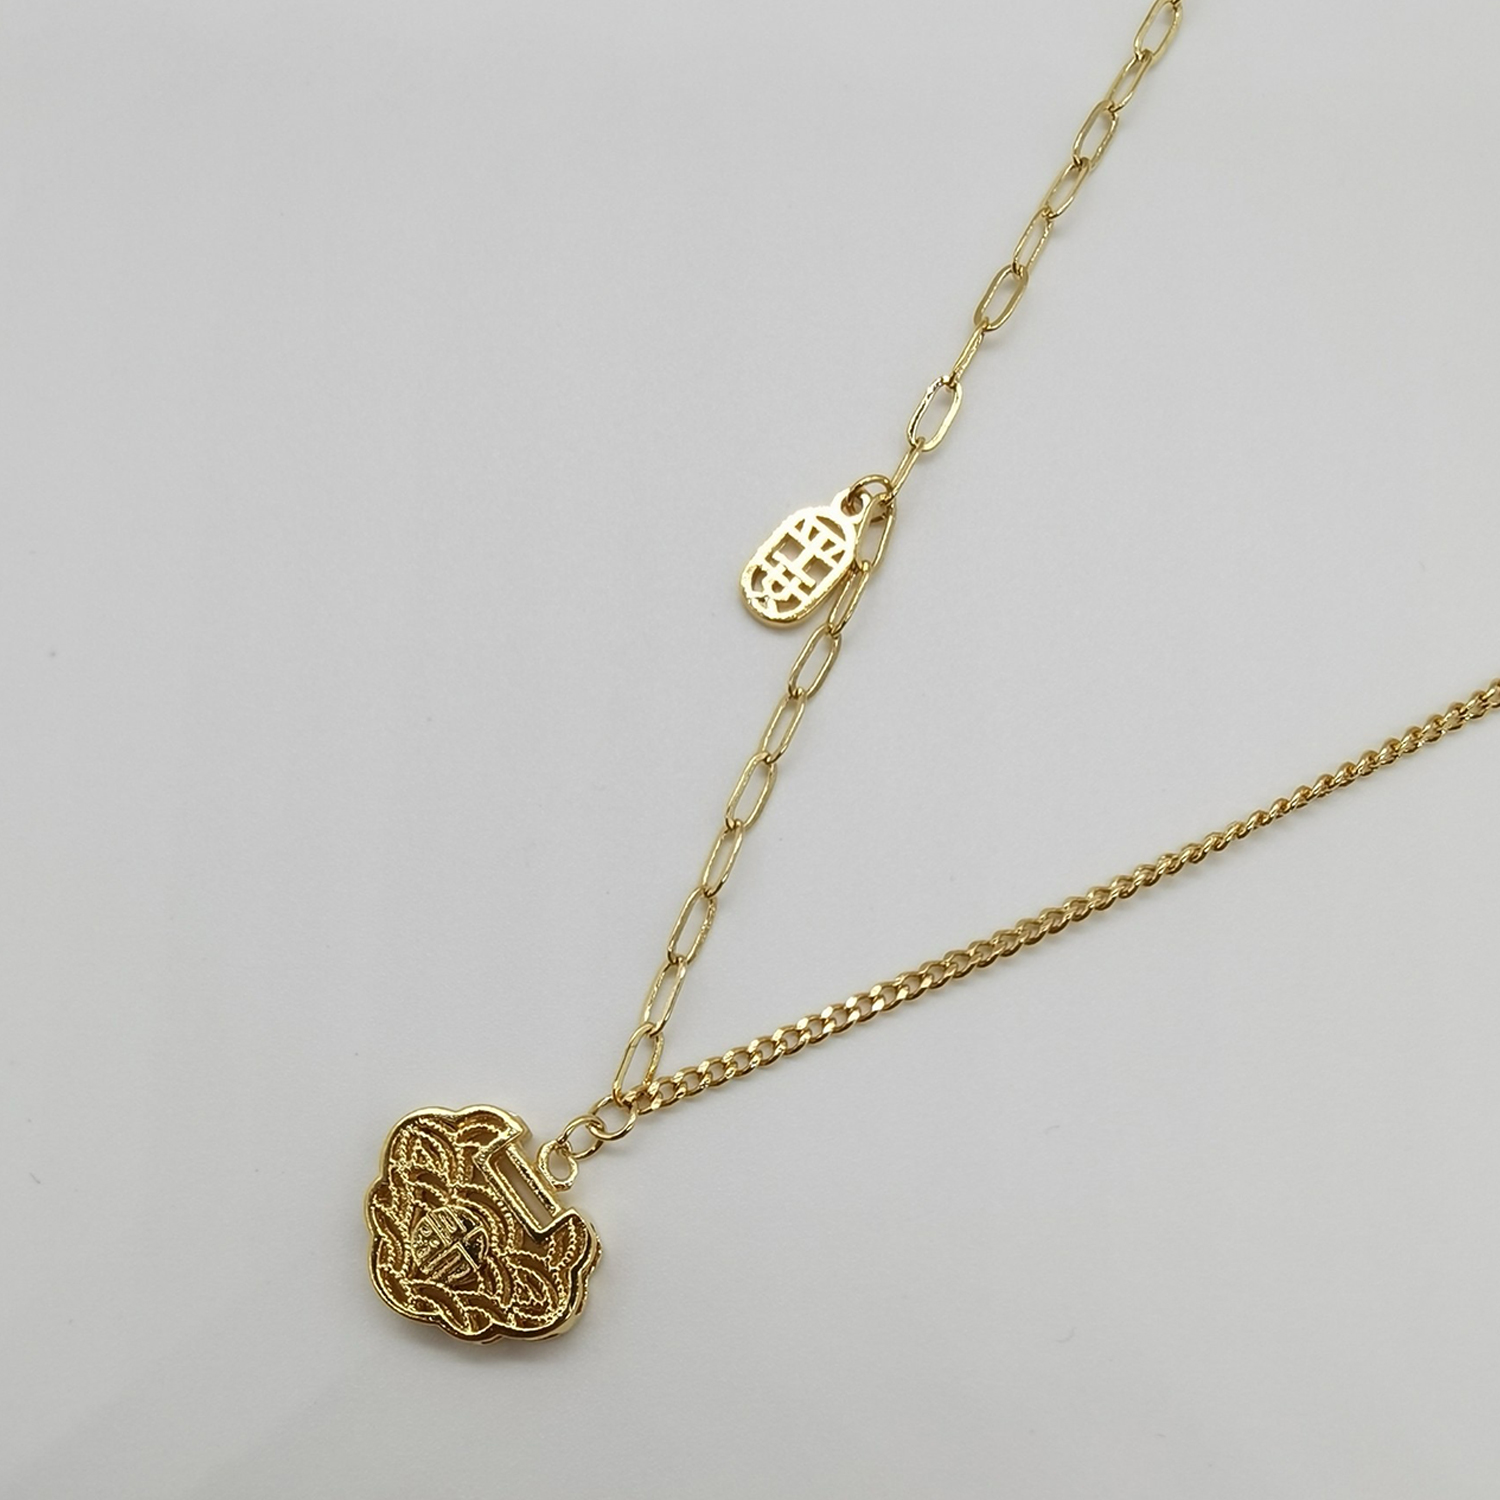 Alluvial gold vacuum electroplating 24K gold hollow longevity lock necklace with blessing character